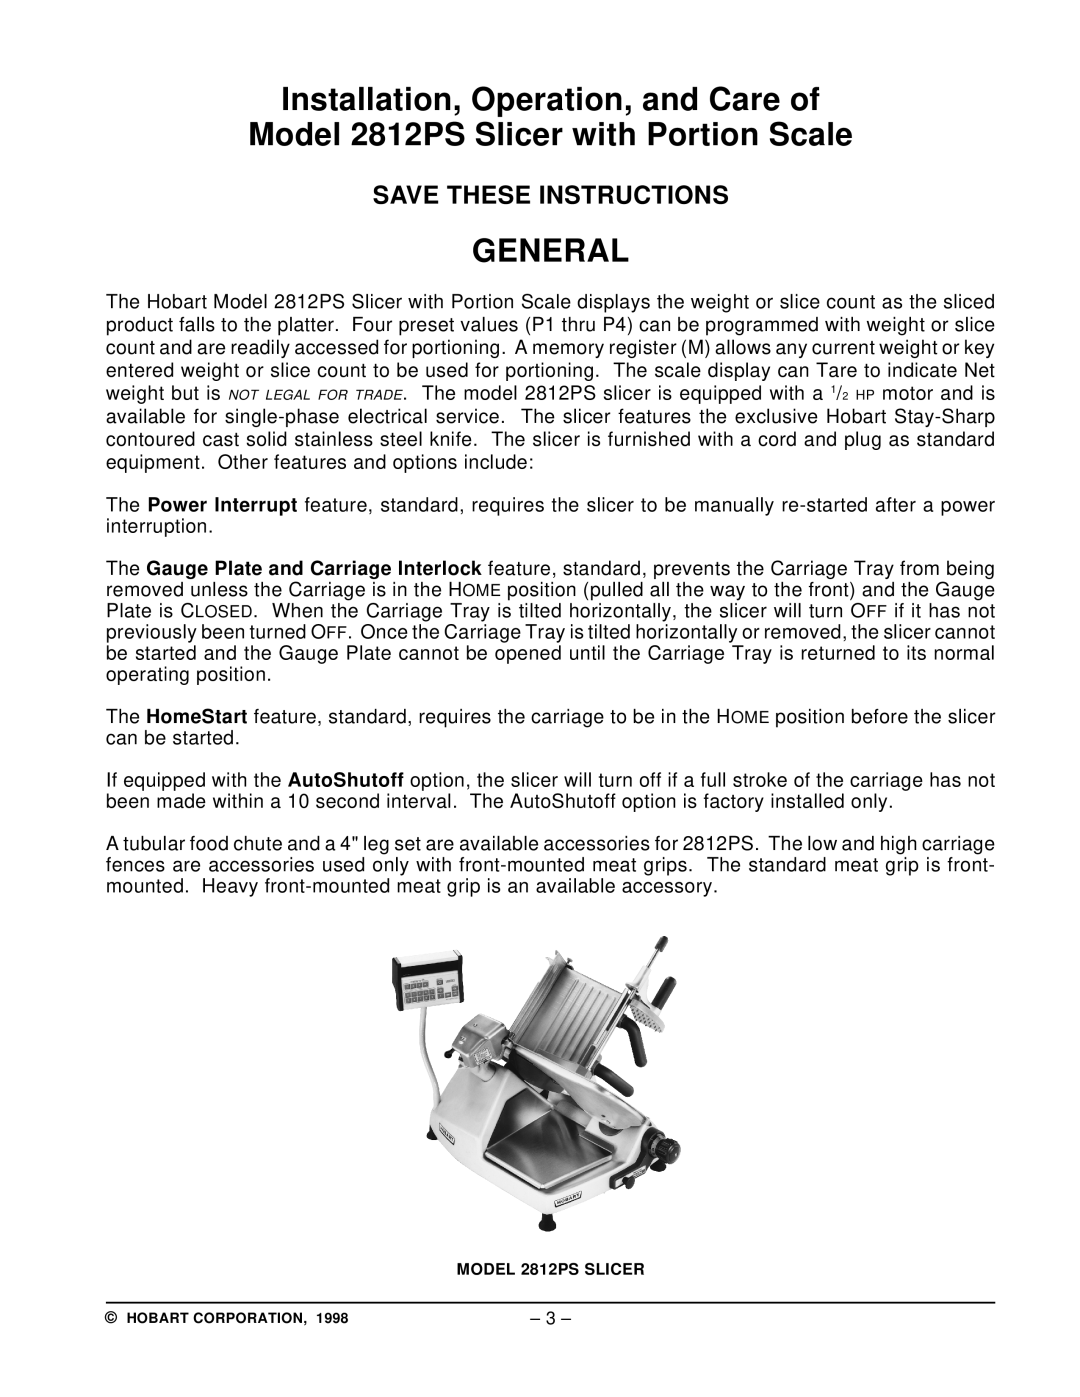 Hobart Installation, Operation, and Care of, Model 2812PS Slicer with Portion Scale, General, Save These Instructions 